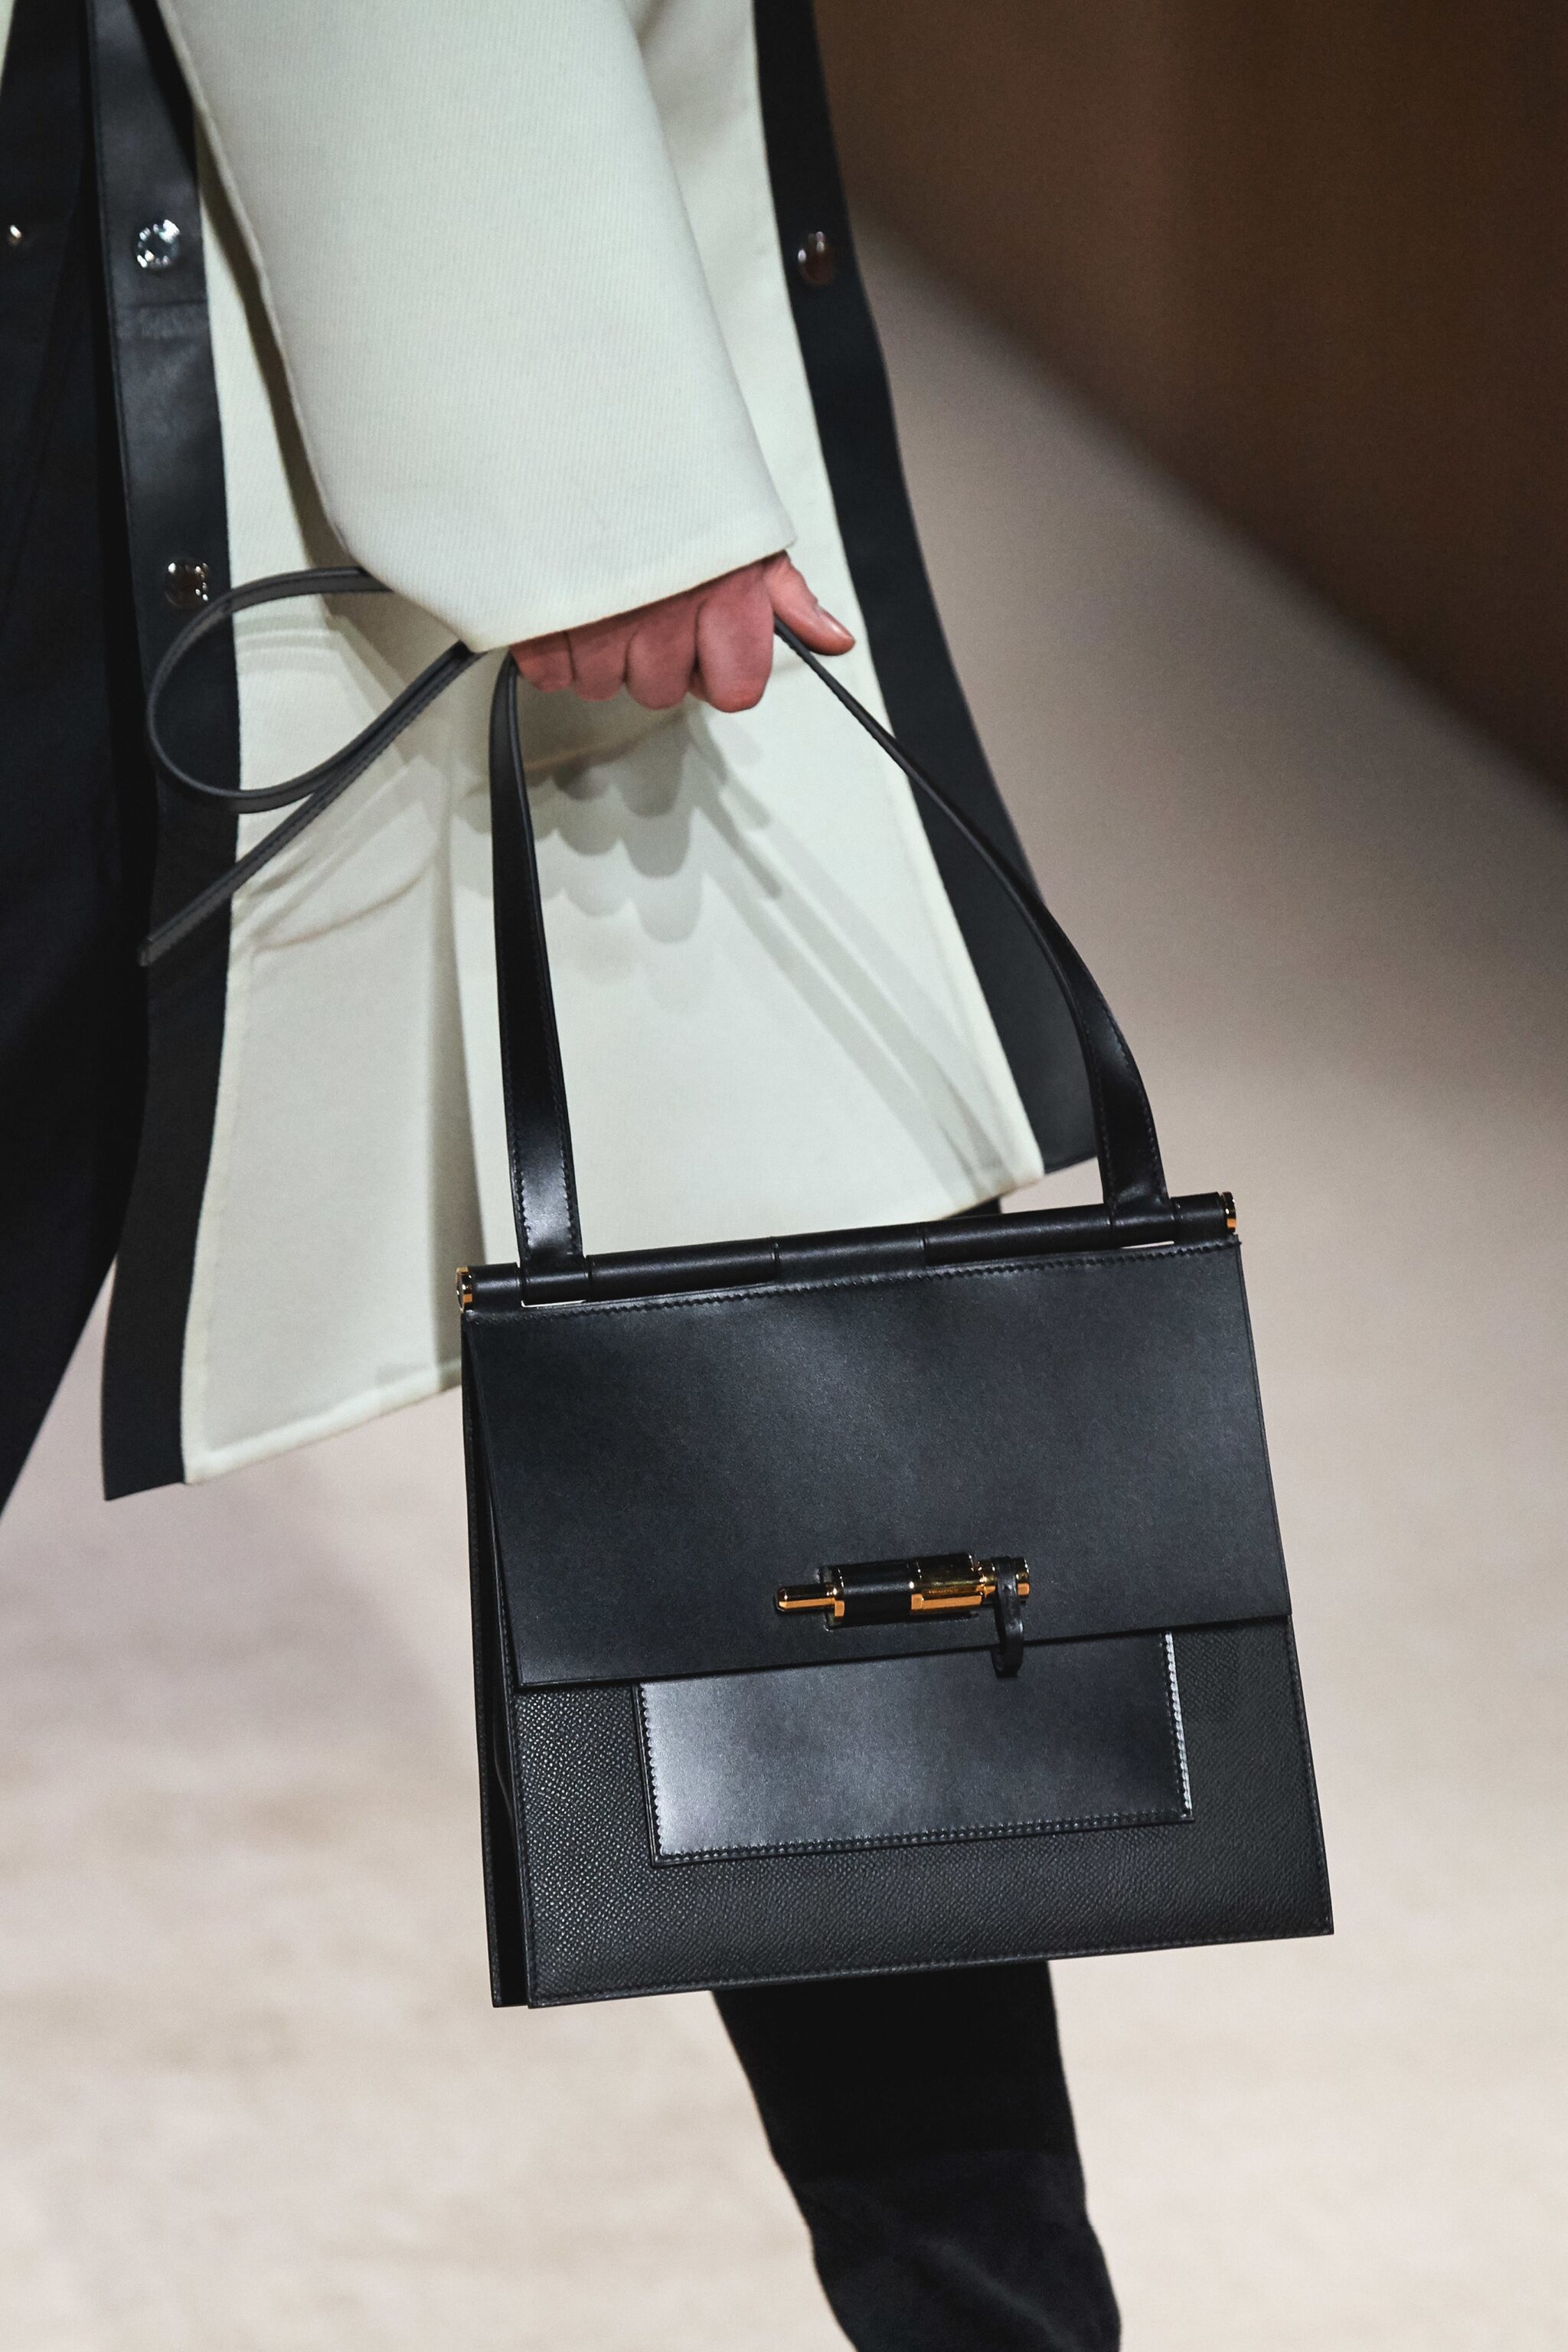 Hermes Fall/Winter 2019 Runway featuring Mini Constance Bag - Spotted ...